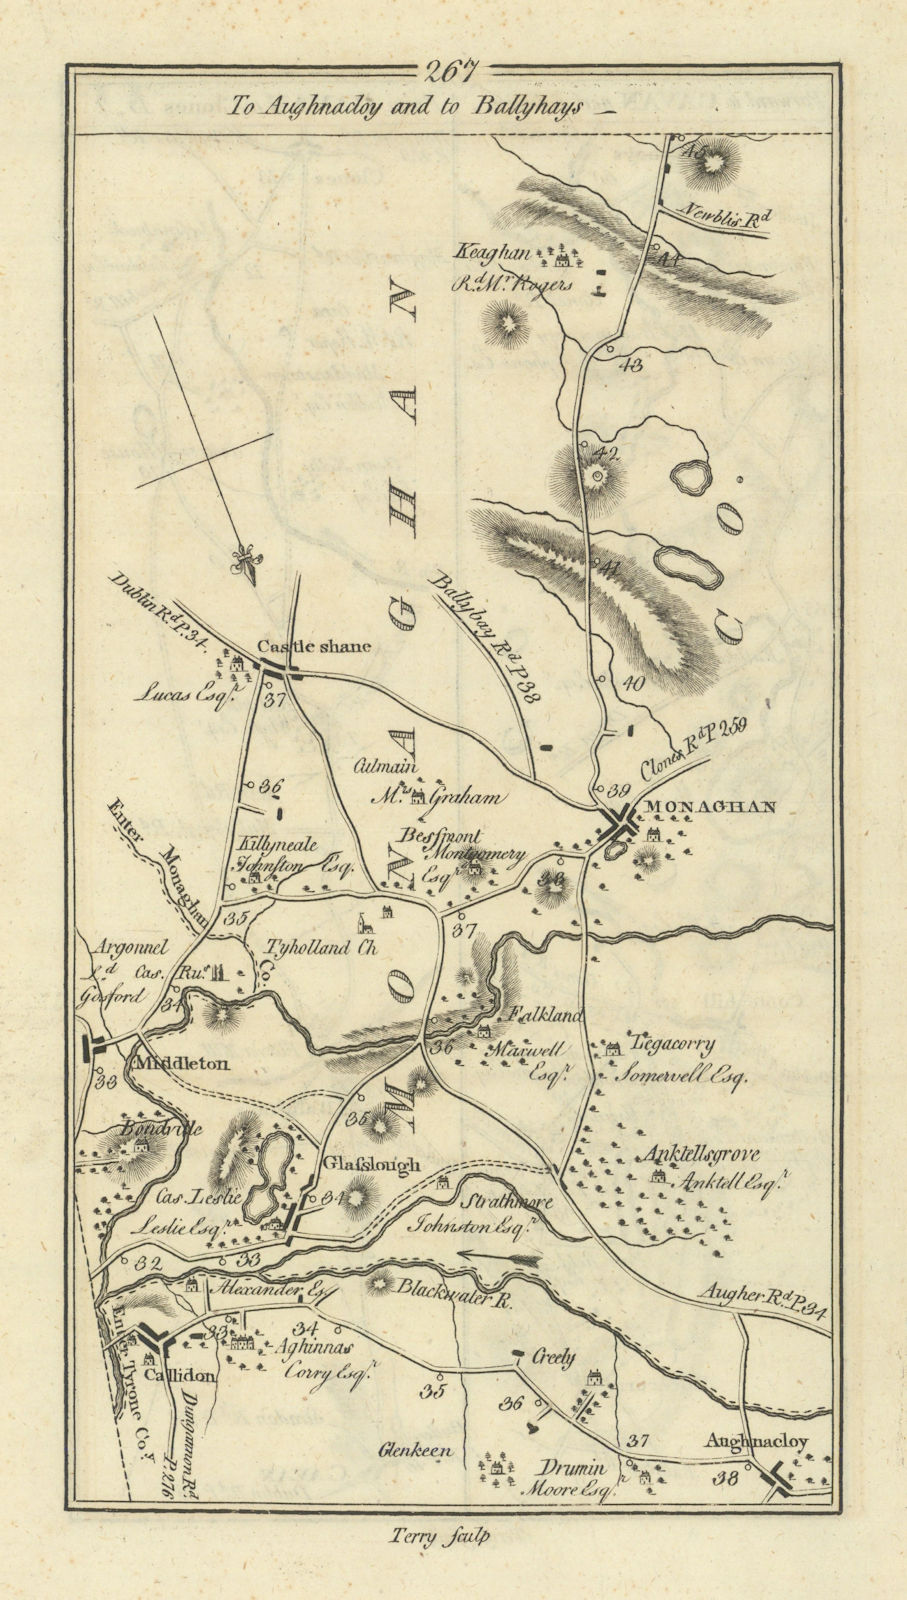 Associate Product #267 to Aughnacloy & Ballyhays. Monaghan Caledon. TAYLOR/SKINNER 1778 old map